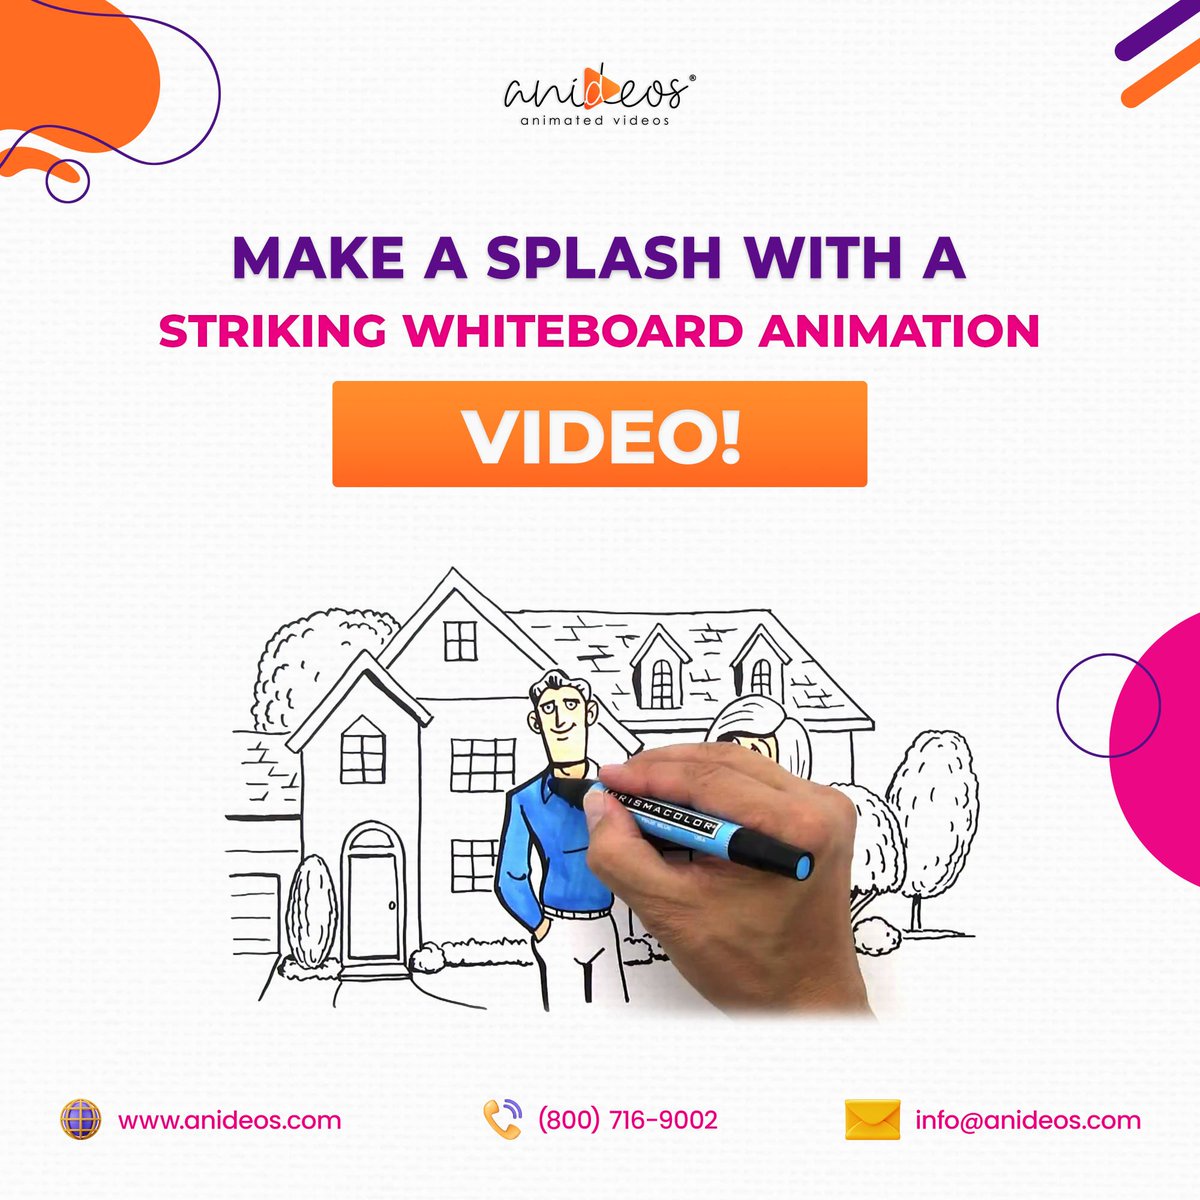 Looking for a powerful way to communicate your brand message?

Try our whiteboard animation service!

It will engage your audience, convey your message clearly, and drive results for your business.

Reach out to us now at: bit.ly/3rkNRN3

#animation #characters